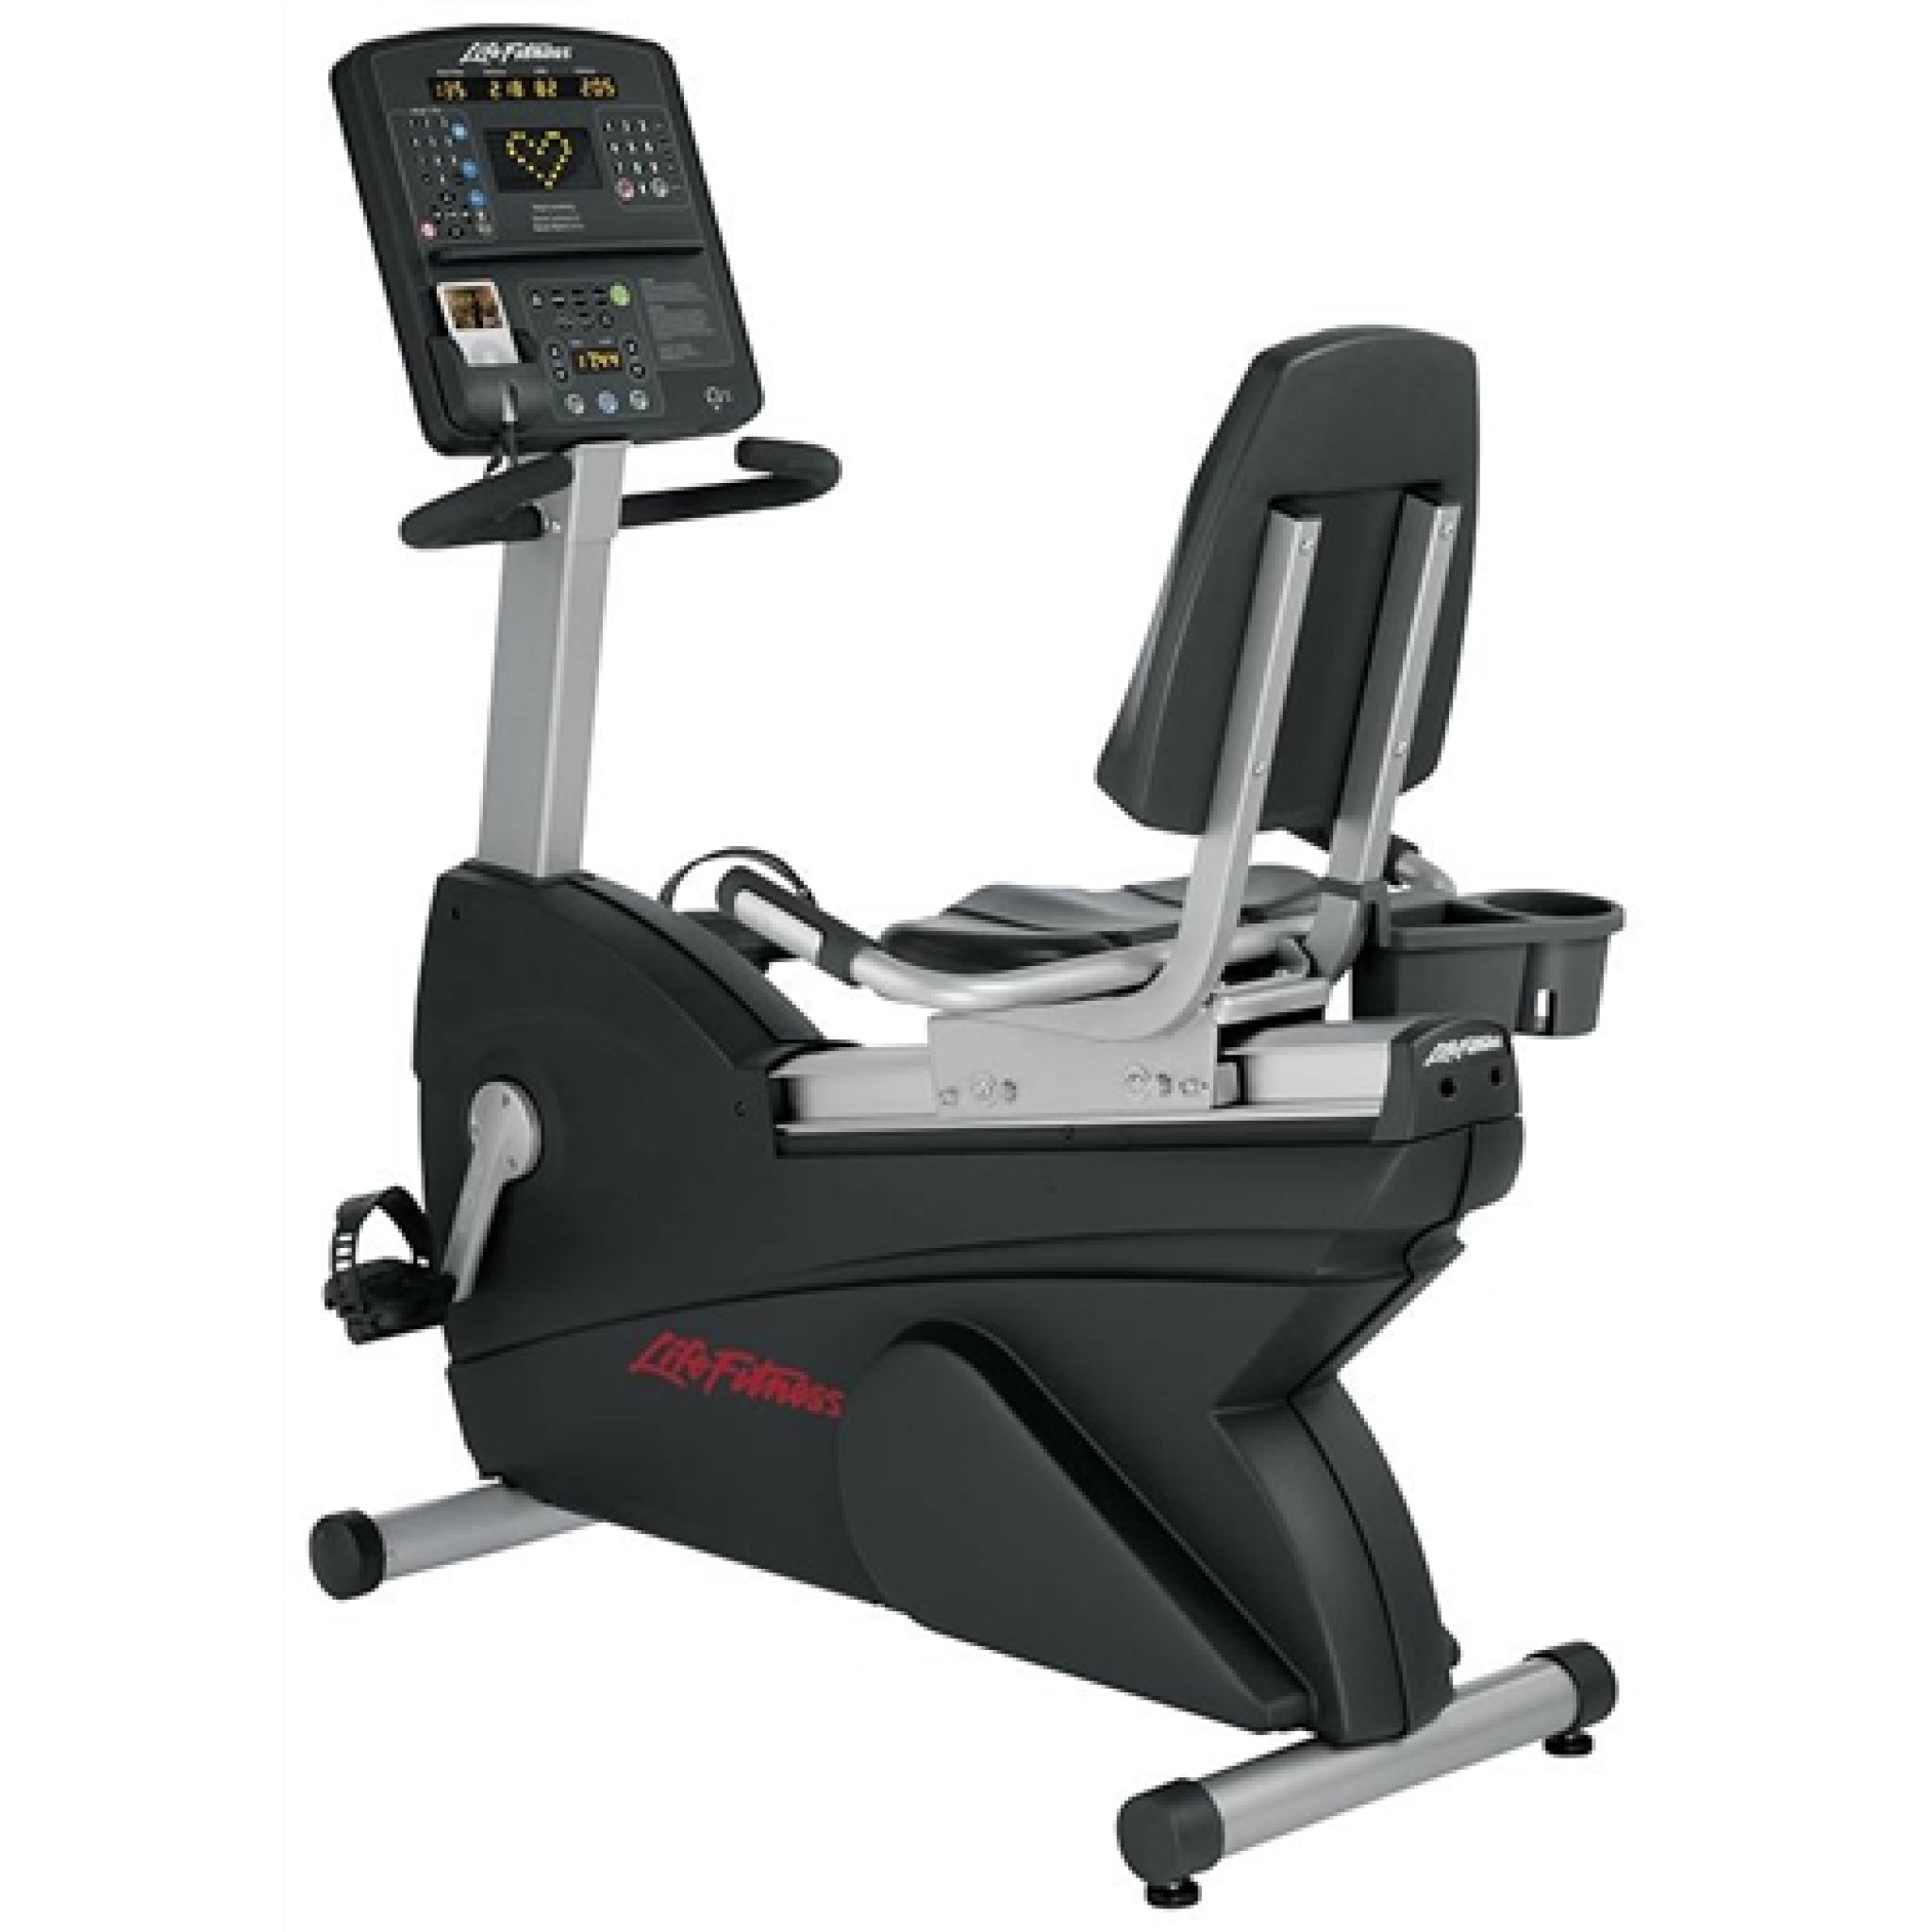 The Life Fitness CLSR Recumbent Bike